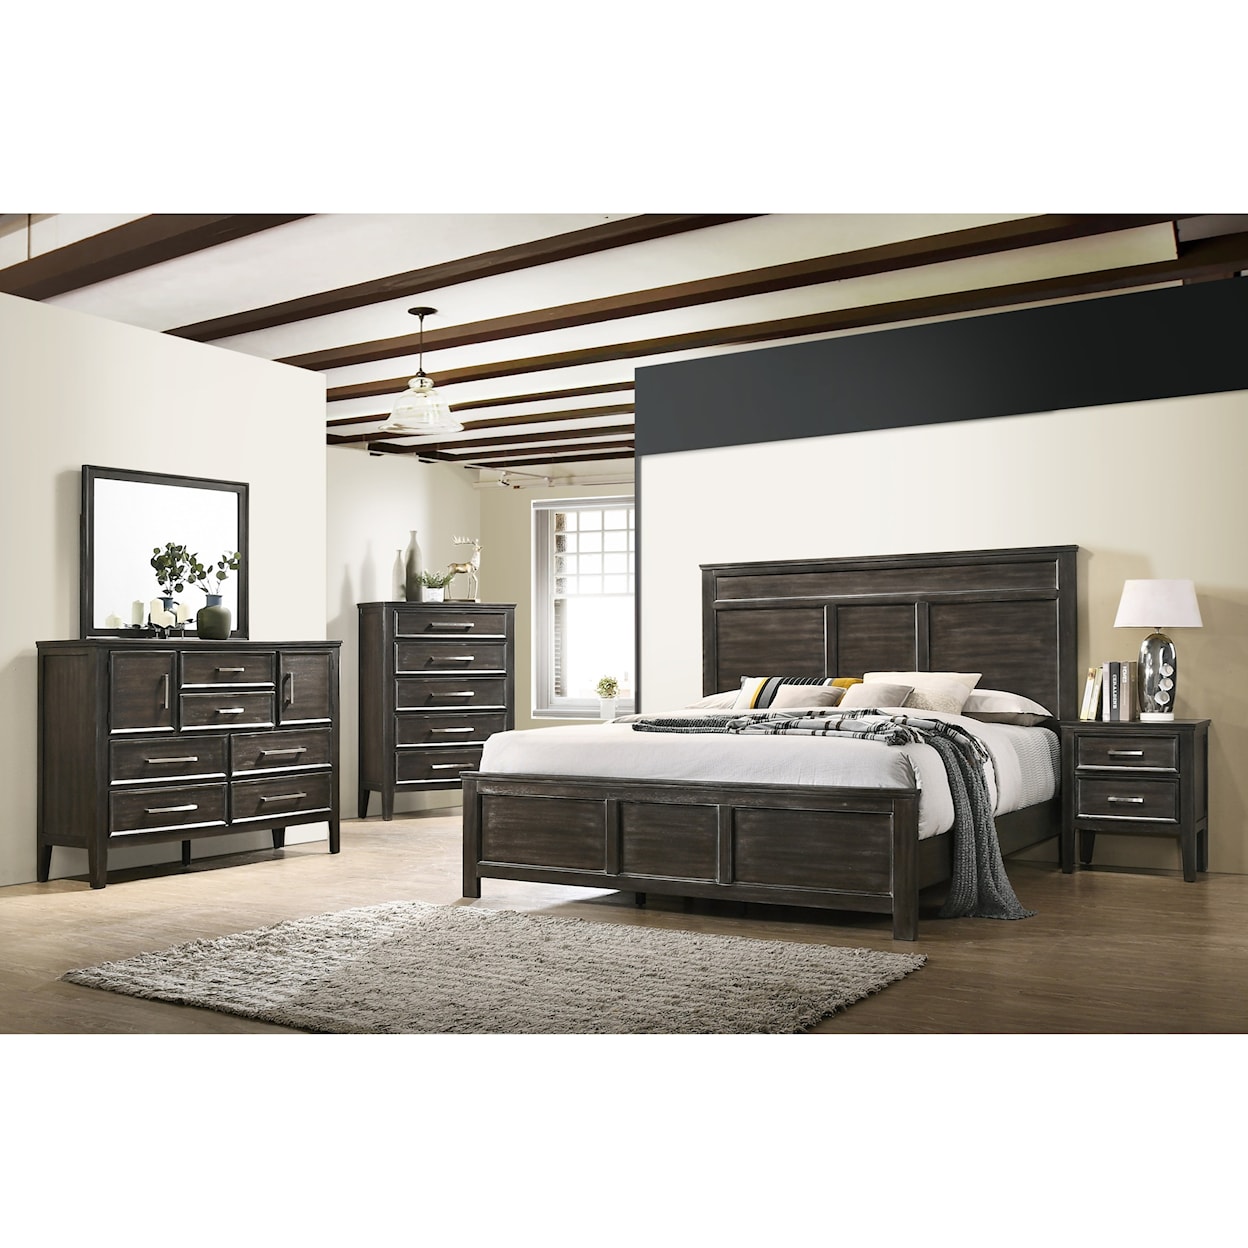 New Classic Andover California King Bedroom Group